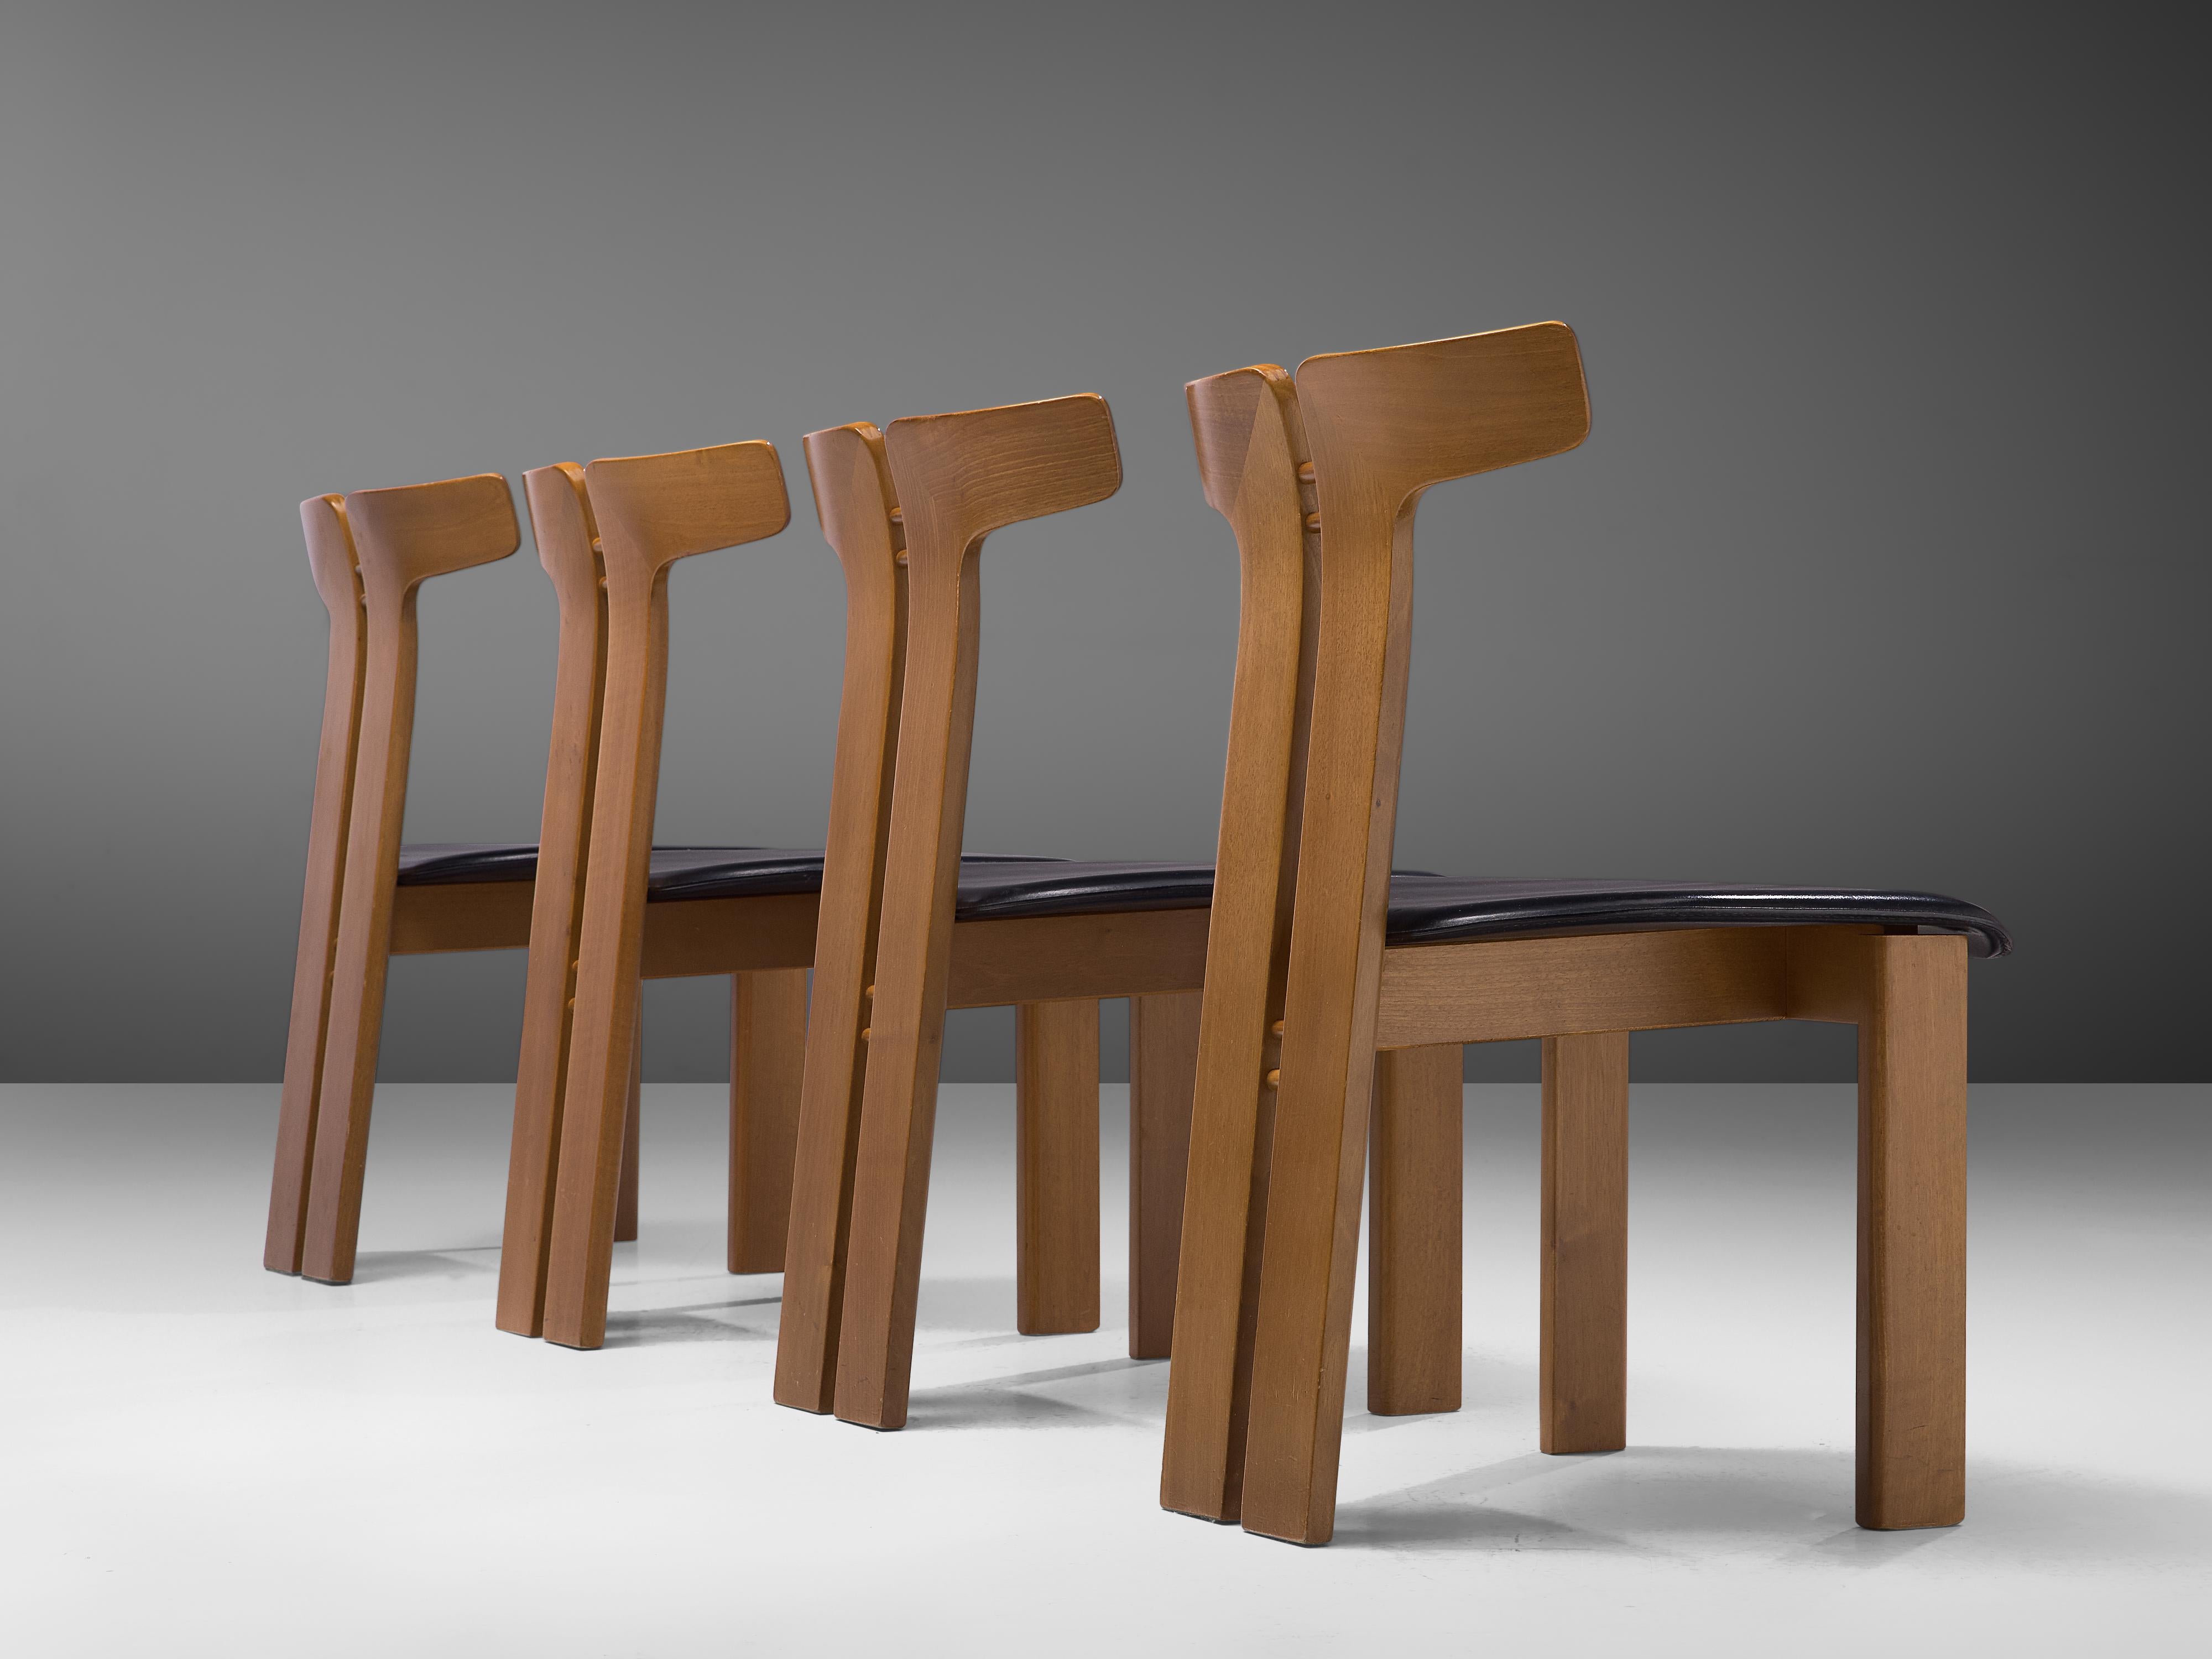 Pierre Cardin, set of four chairs, ash and leather, Italy, 1980s

This set of sculptural chairs is designed by Pierre Cardin. The curved back highlights the qualities of the wood and its shape in an unparalleled manner. These organic lines are